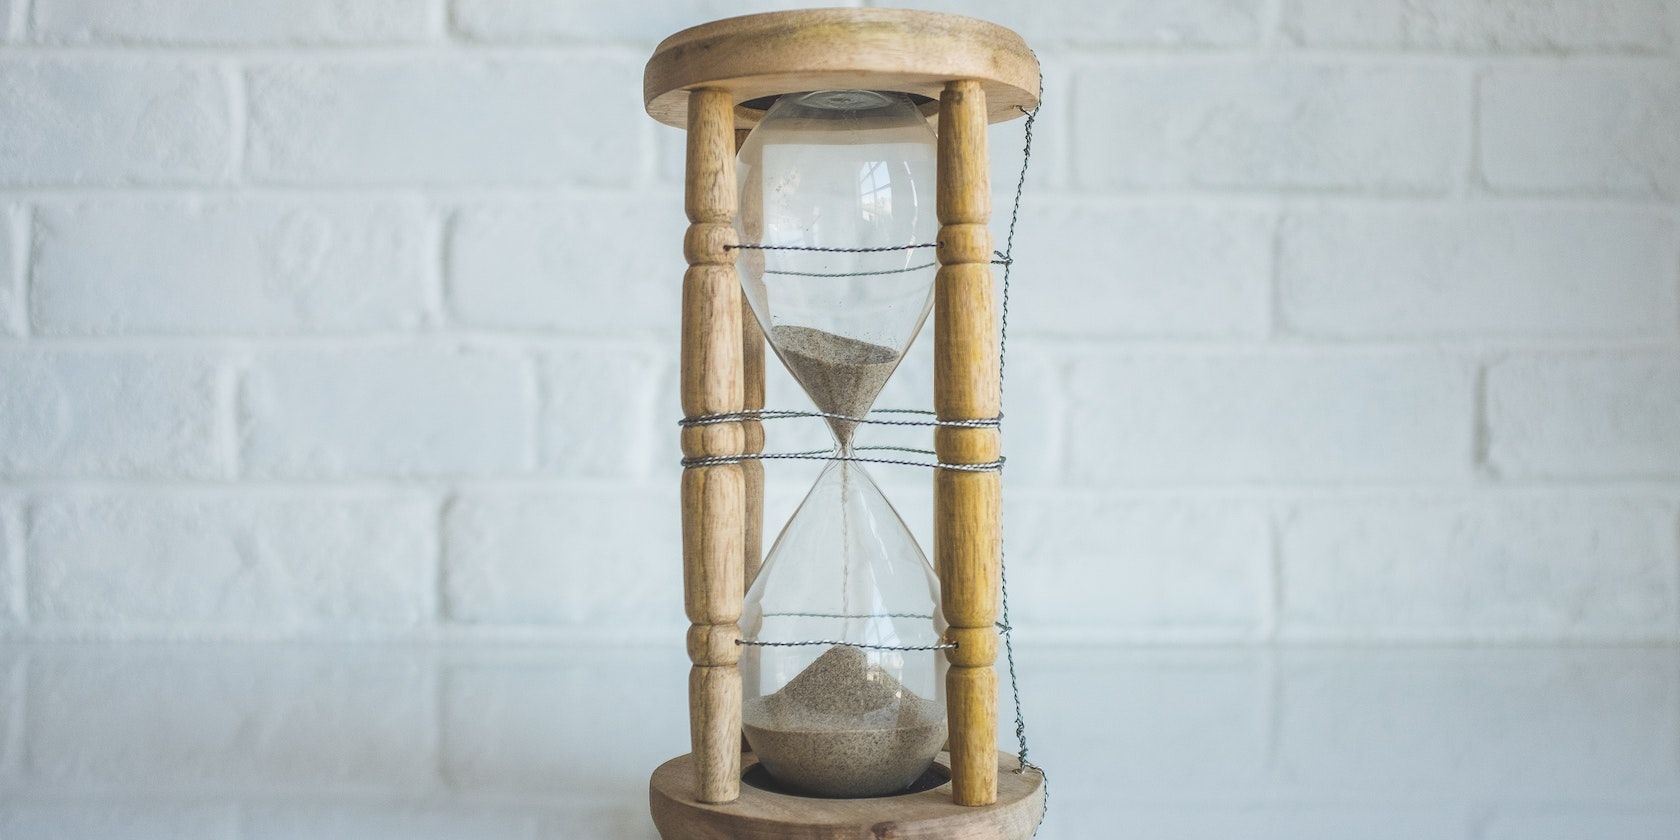 A photograph of an hourglass showing sand trickling through a tiny hole from one glass bowl into another below it